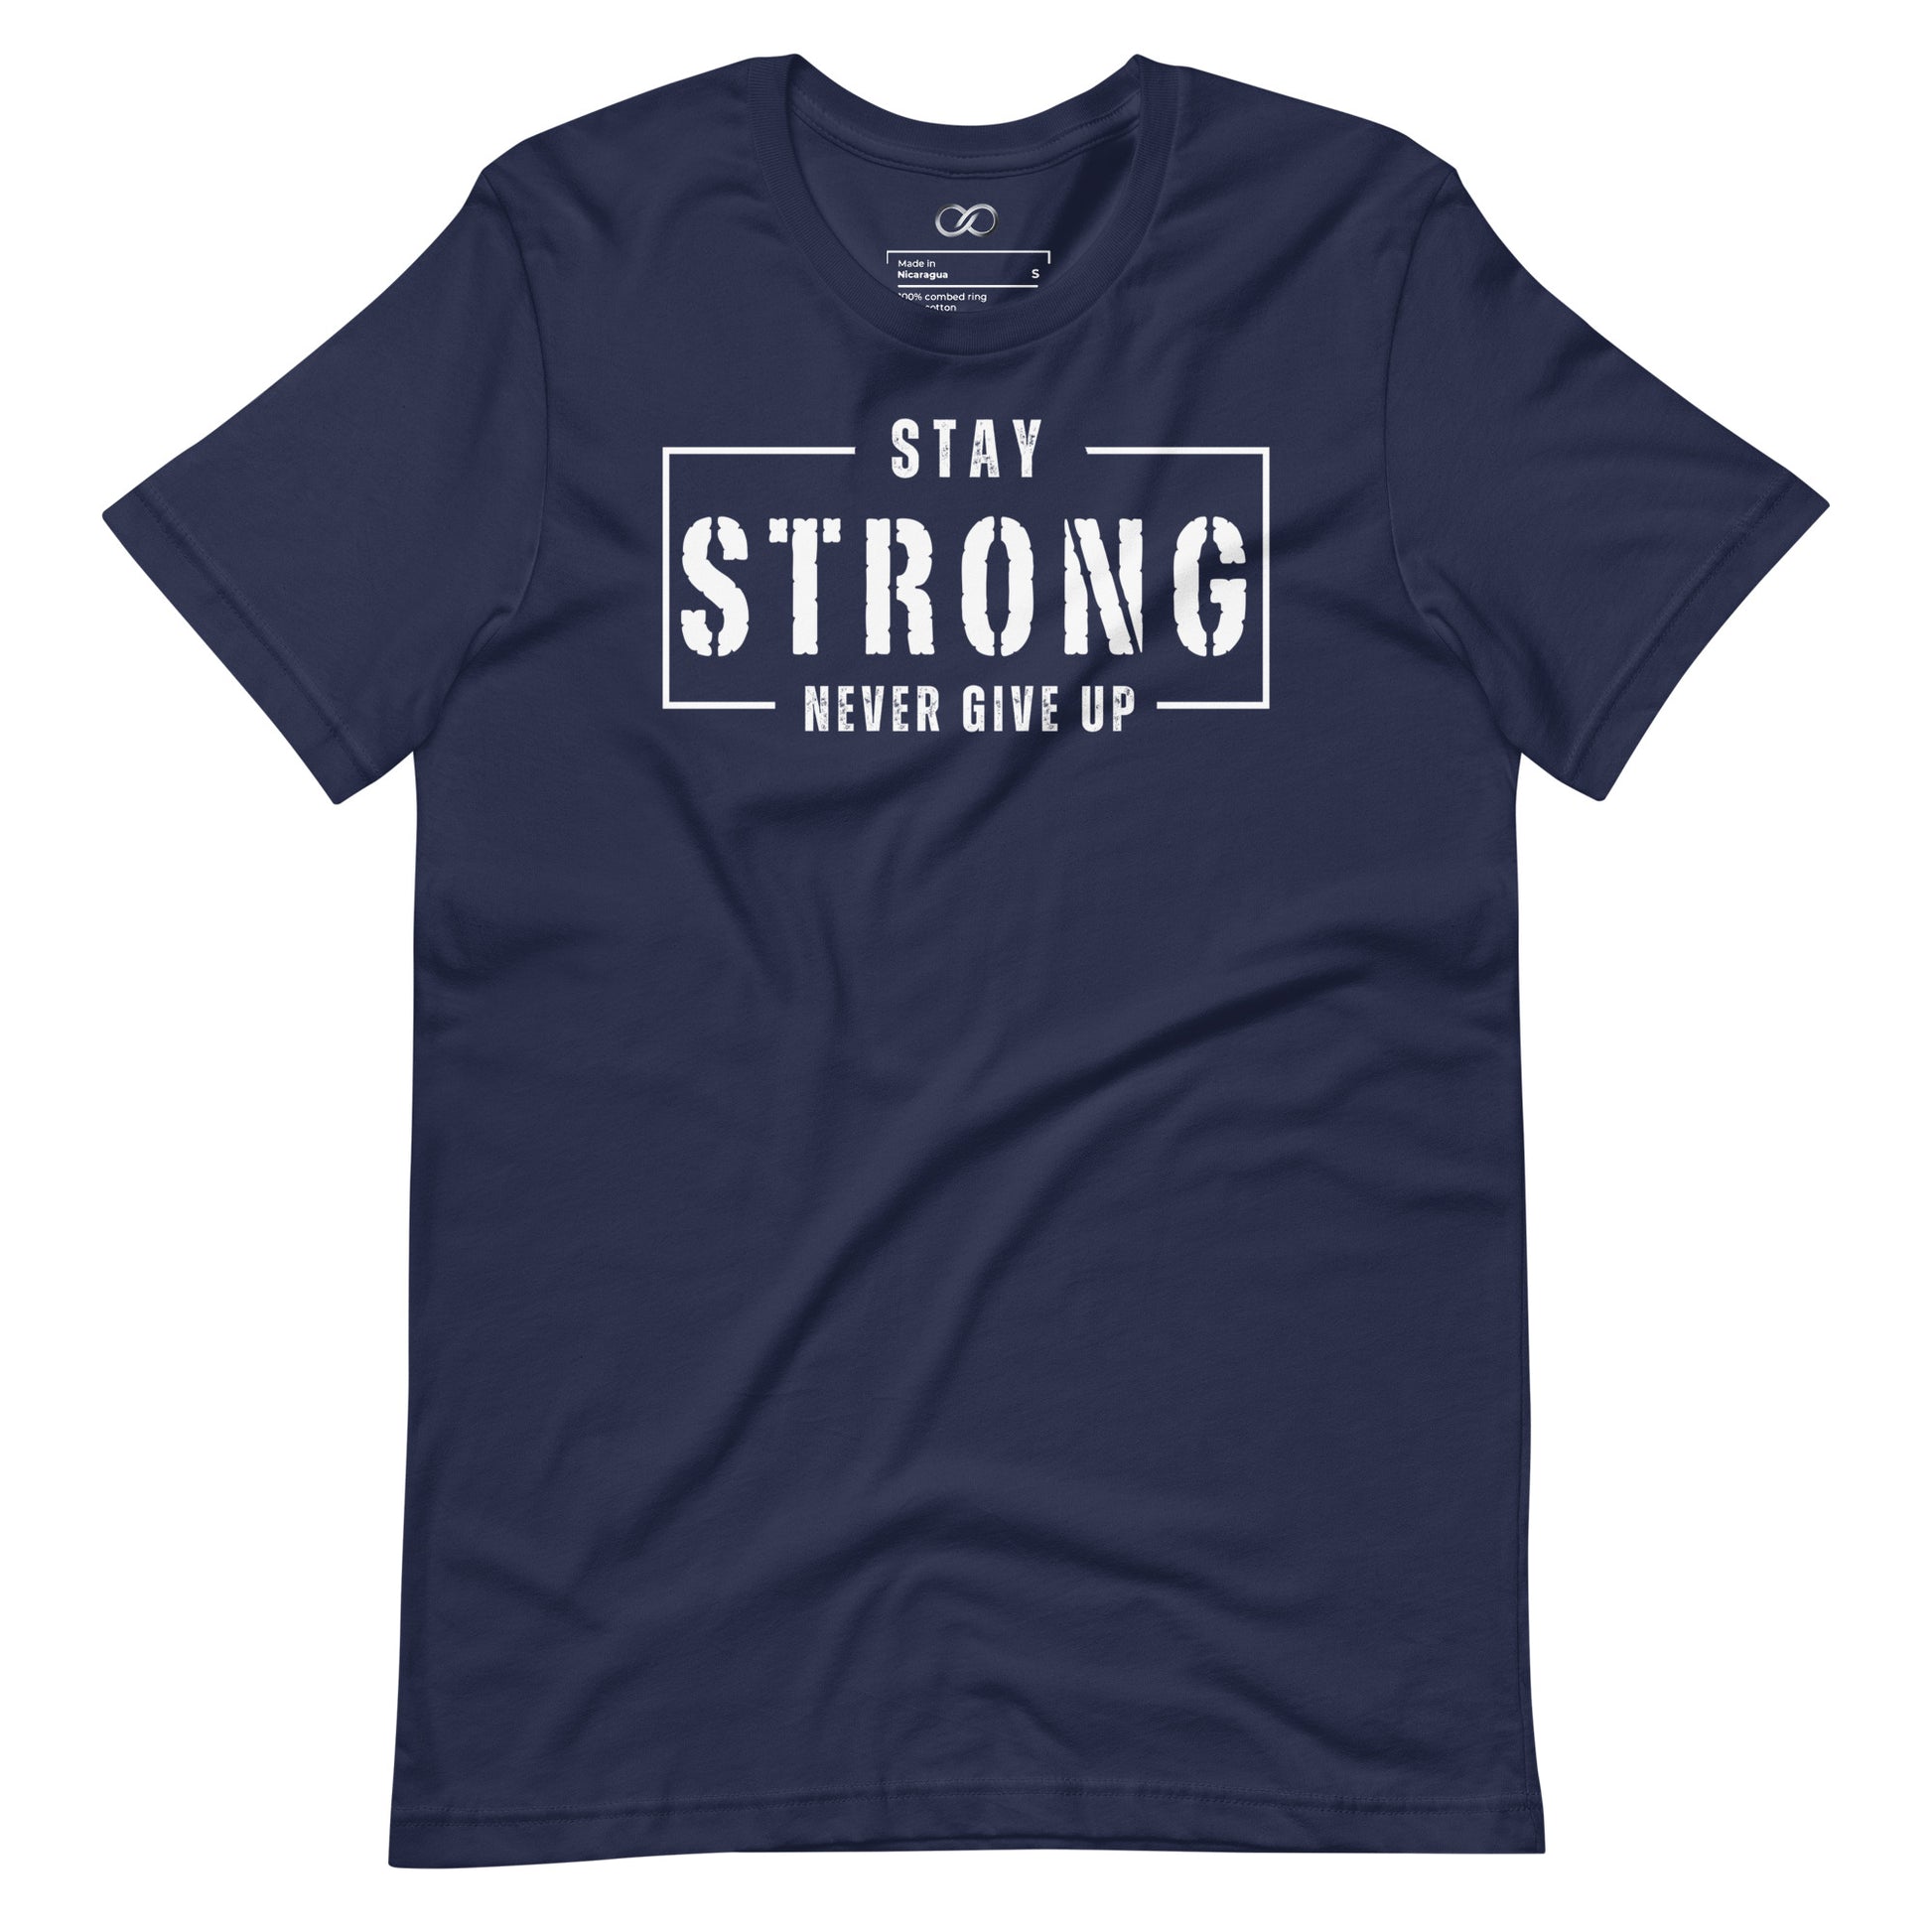 Navy crew neck t-shirt featuring the motivational phrase 'Stay Strong Never Give Up' in bold white lettering, symbolizing determination and courage.